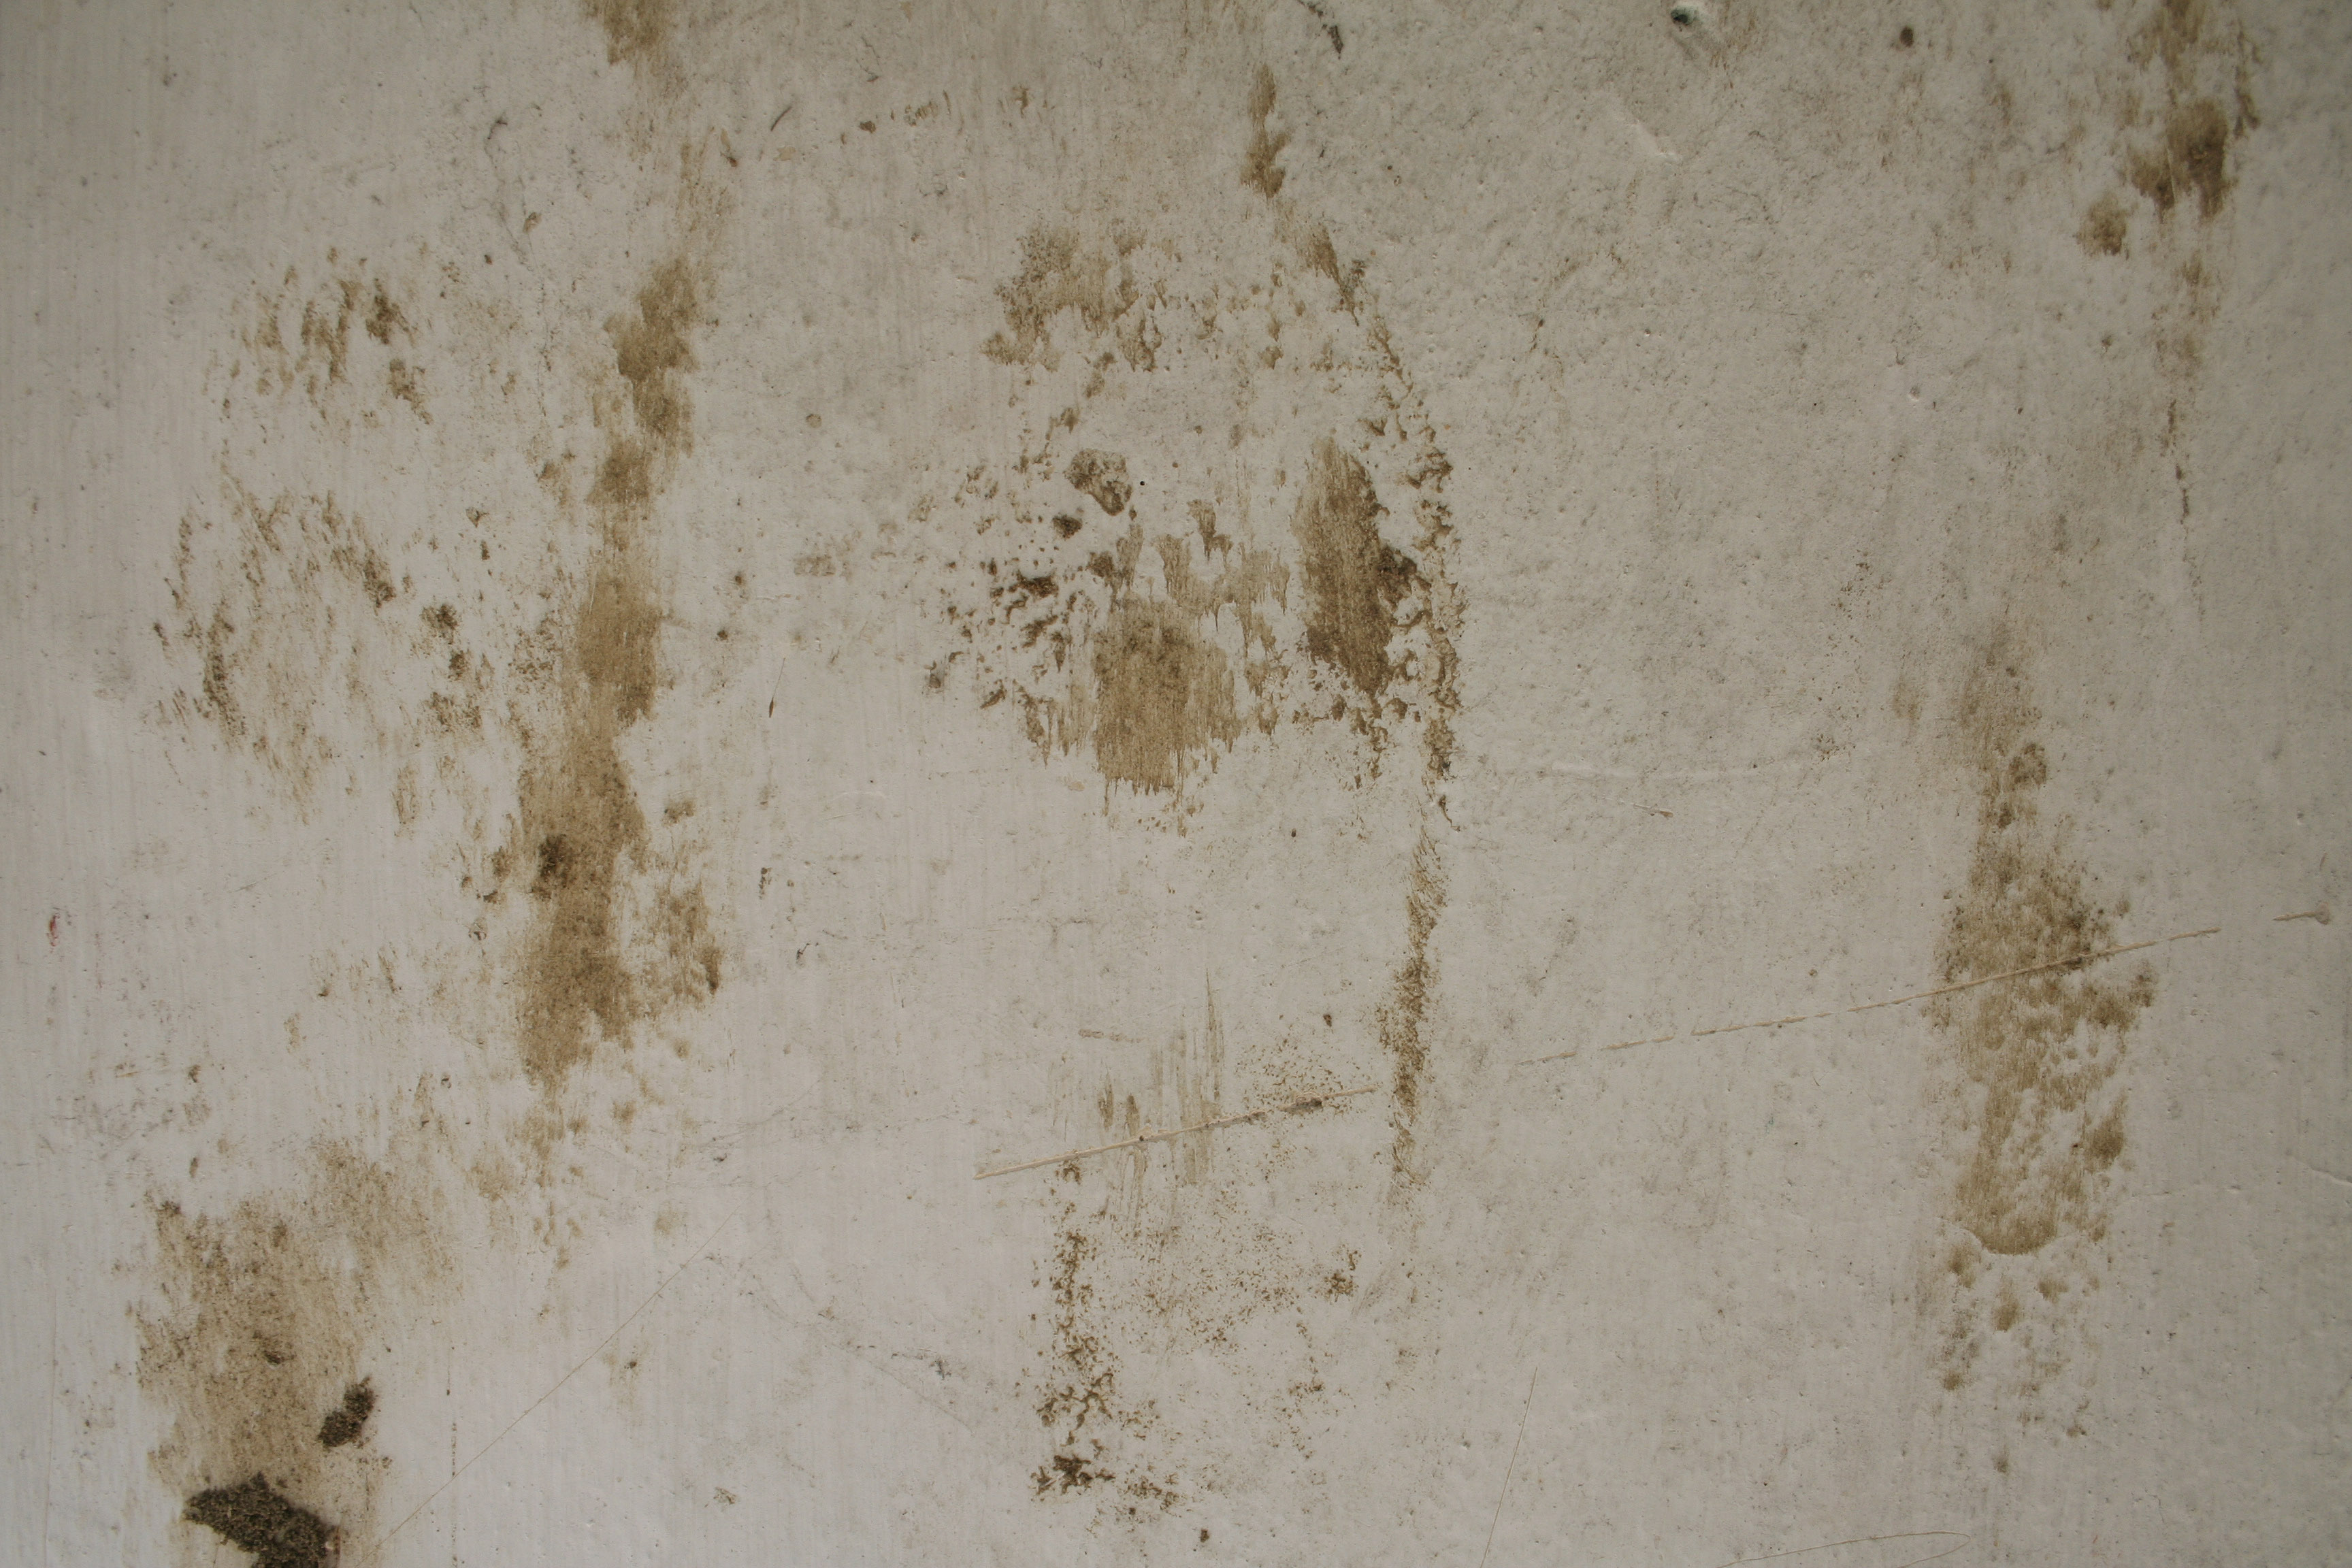 Dirty wall, free texture | Textures for photoshop free